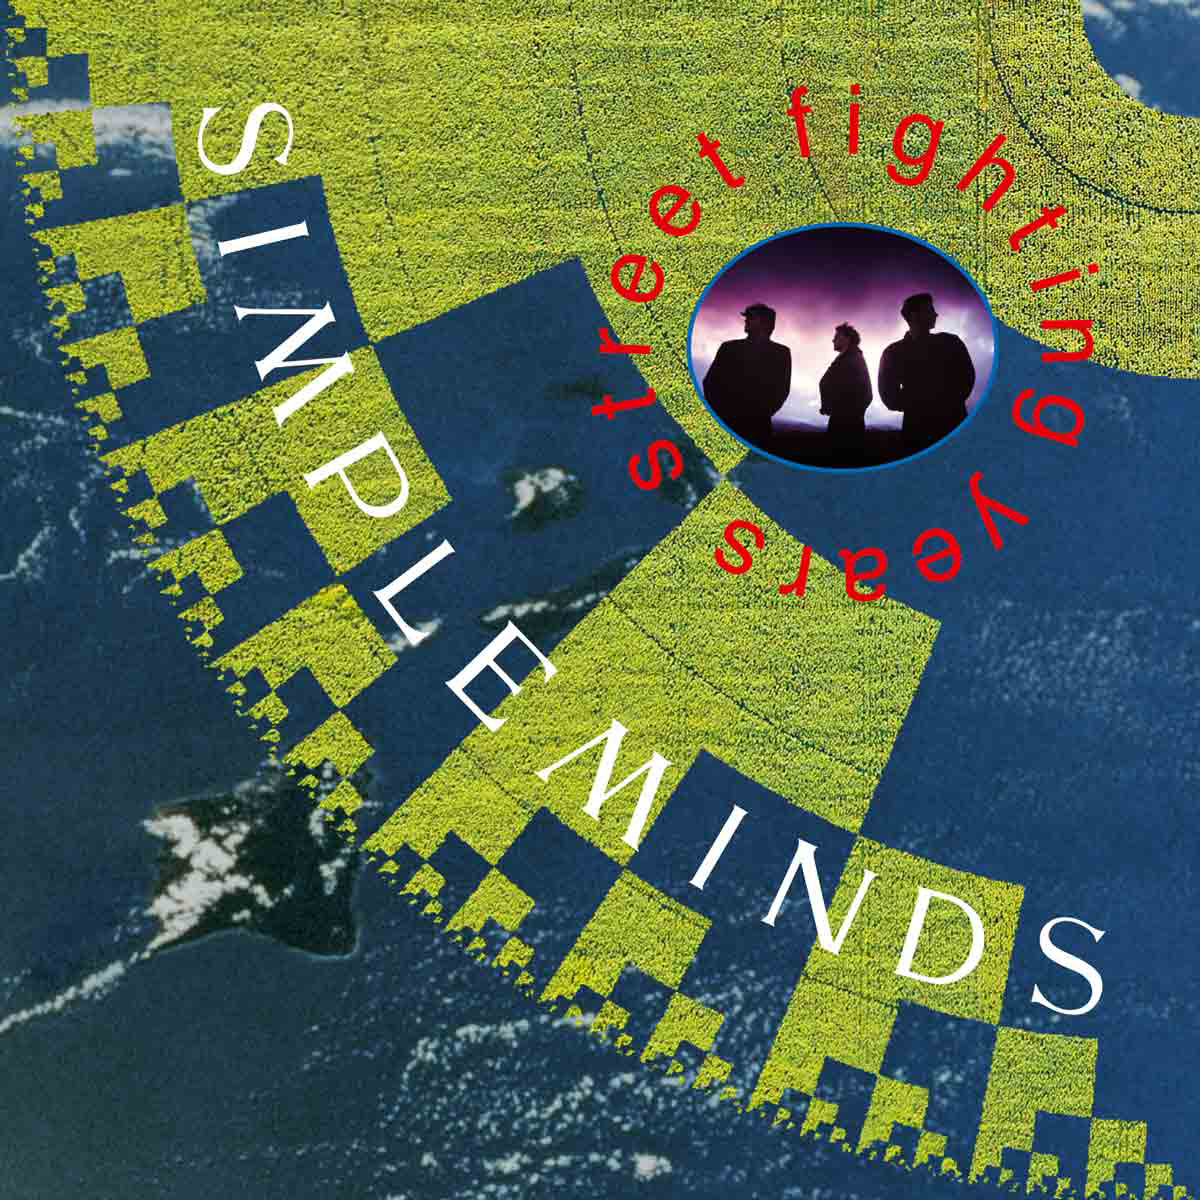 ALBUM REVIEW: Simple Minds - Street Fighting Years - 4-CD Box Set 